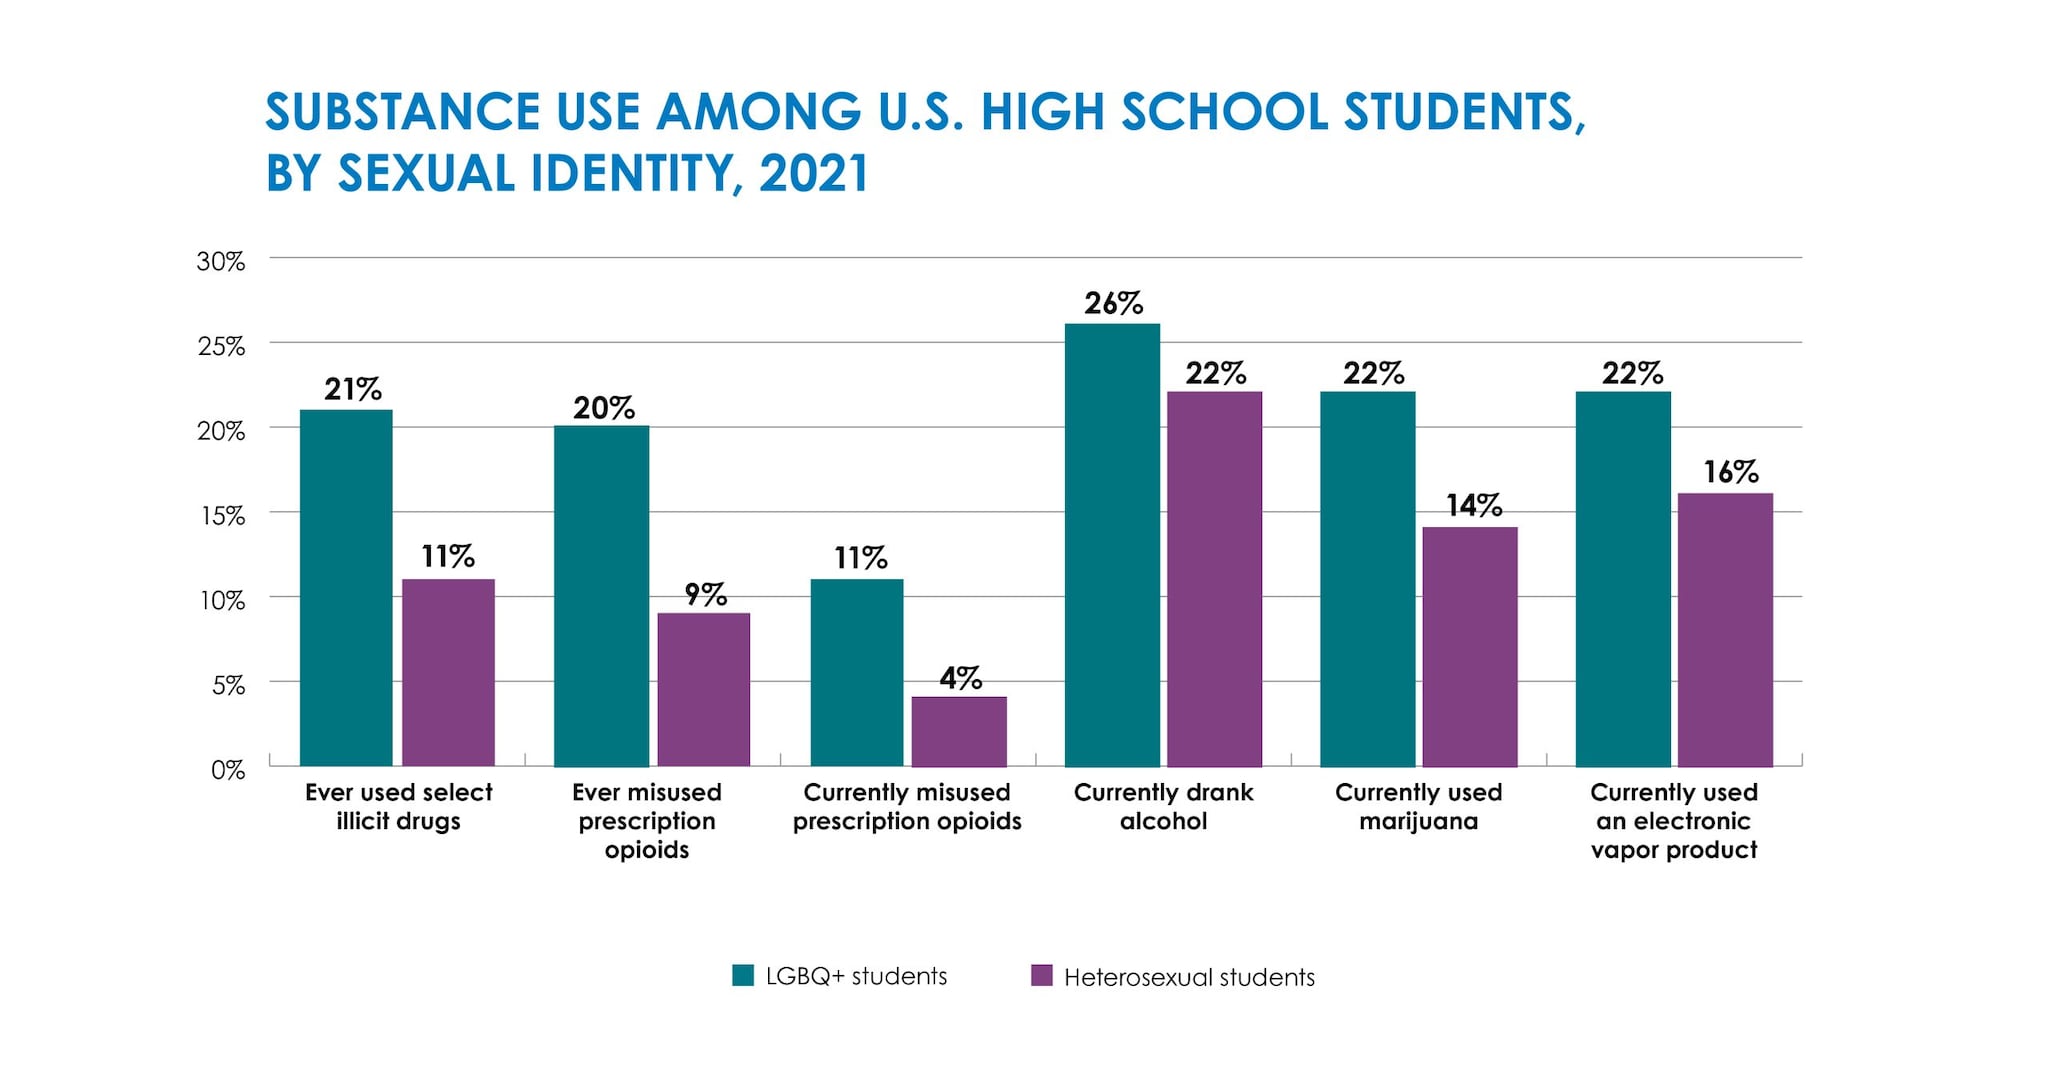 A grouped bar chart showing 2021 U.S. student data on substance use by sexual identity, with the highest levels reported among LGBQ+ students across all indicators